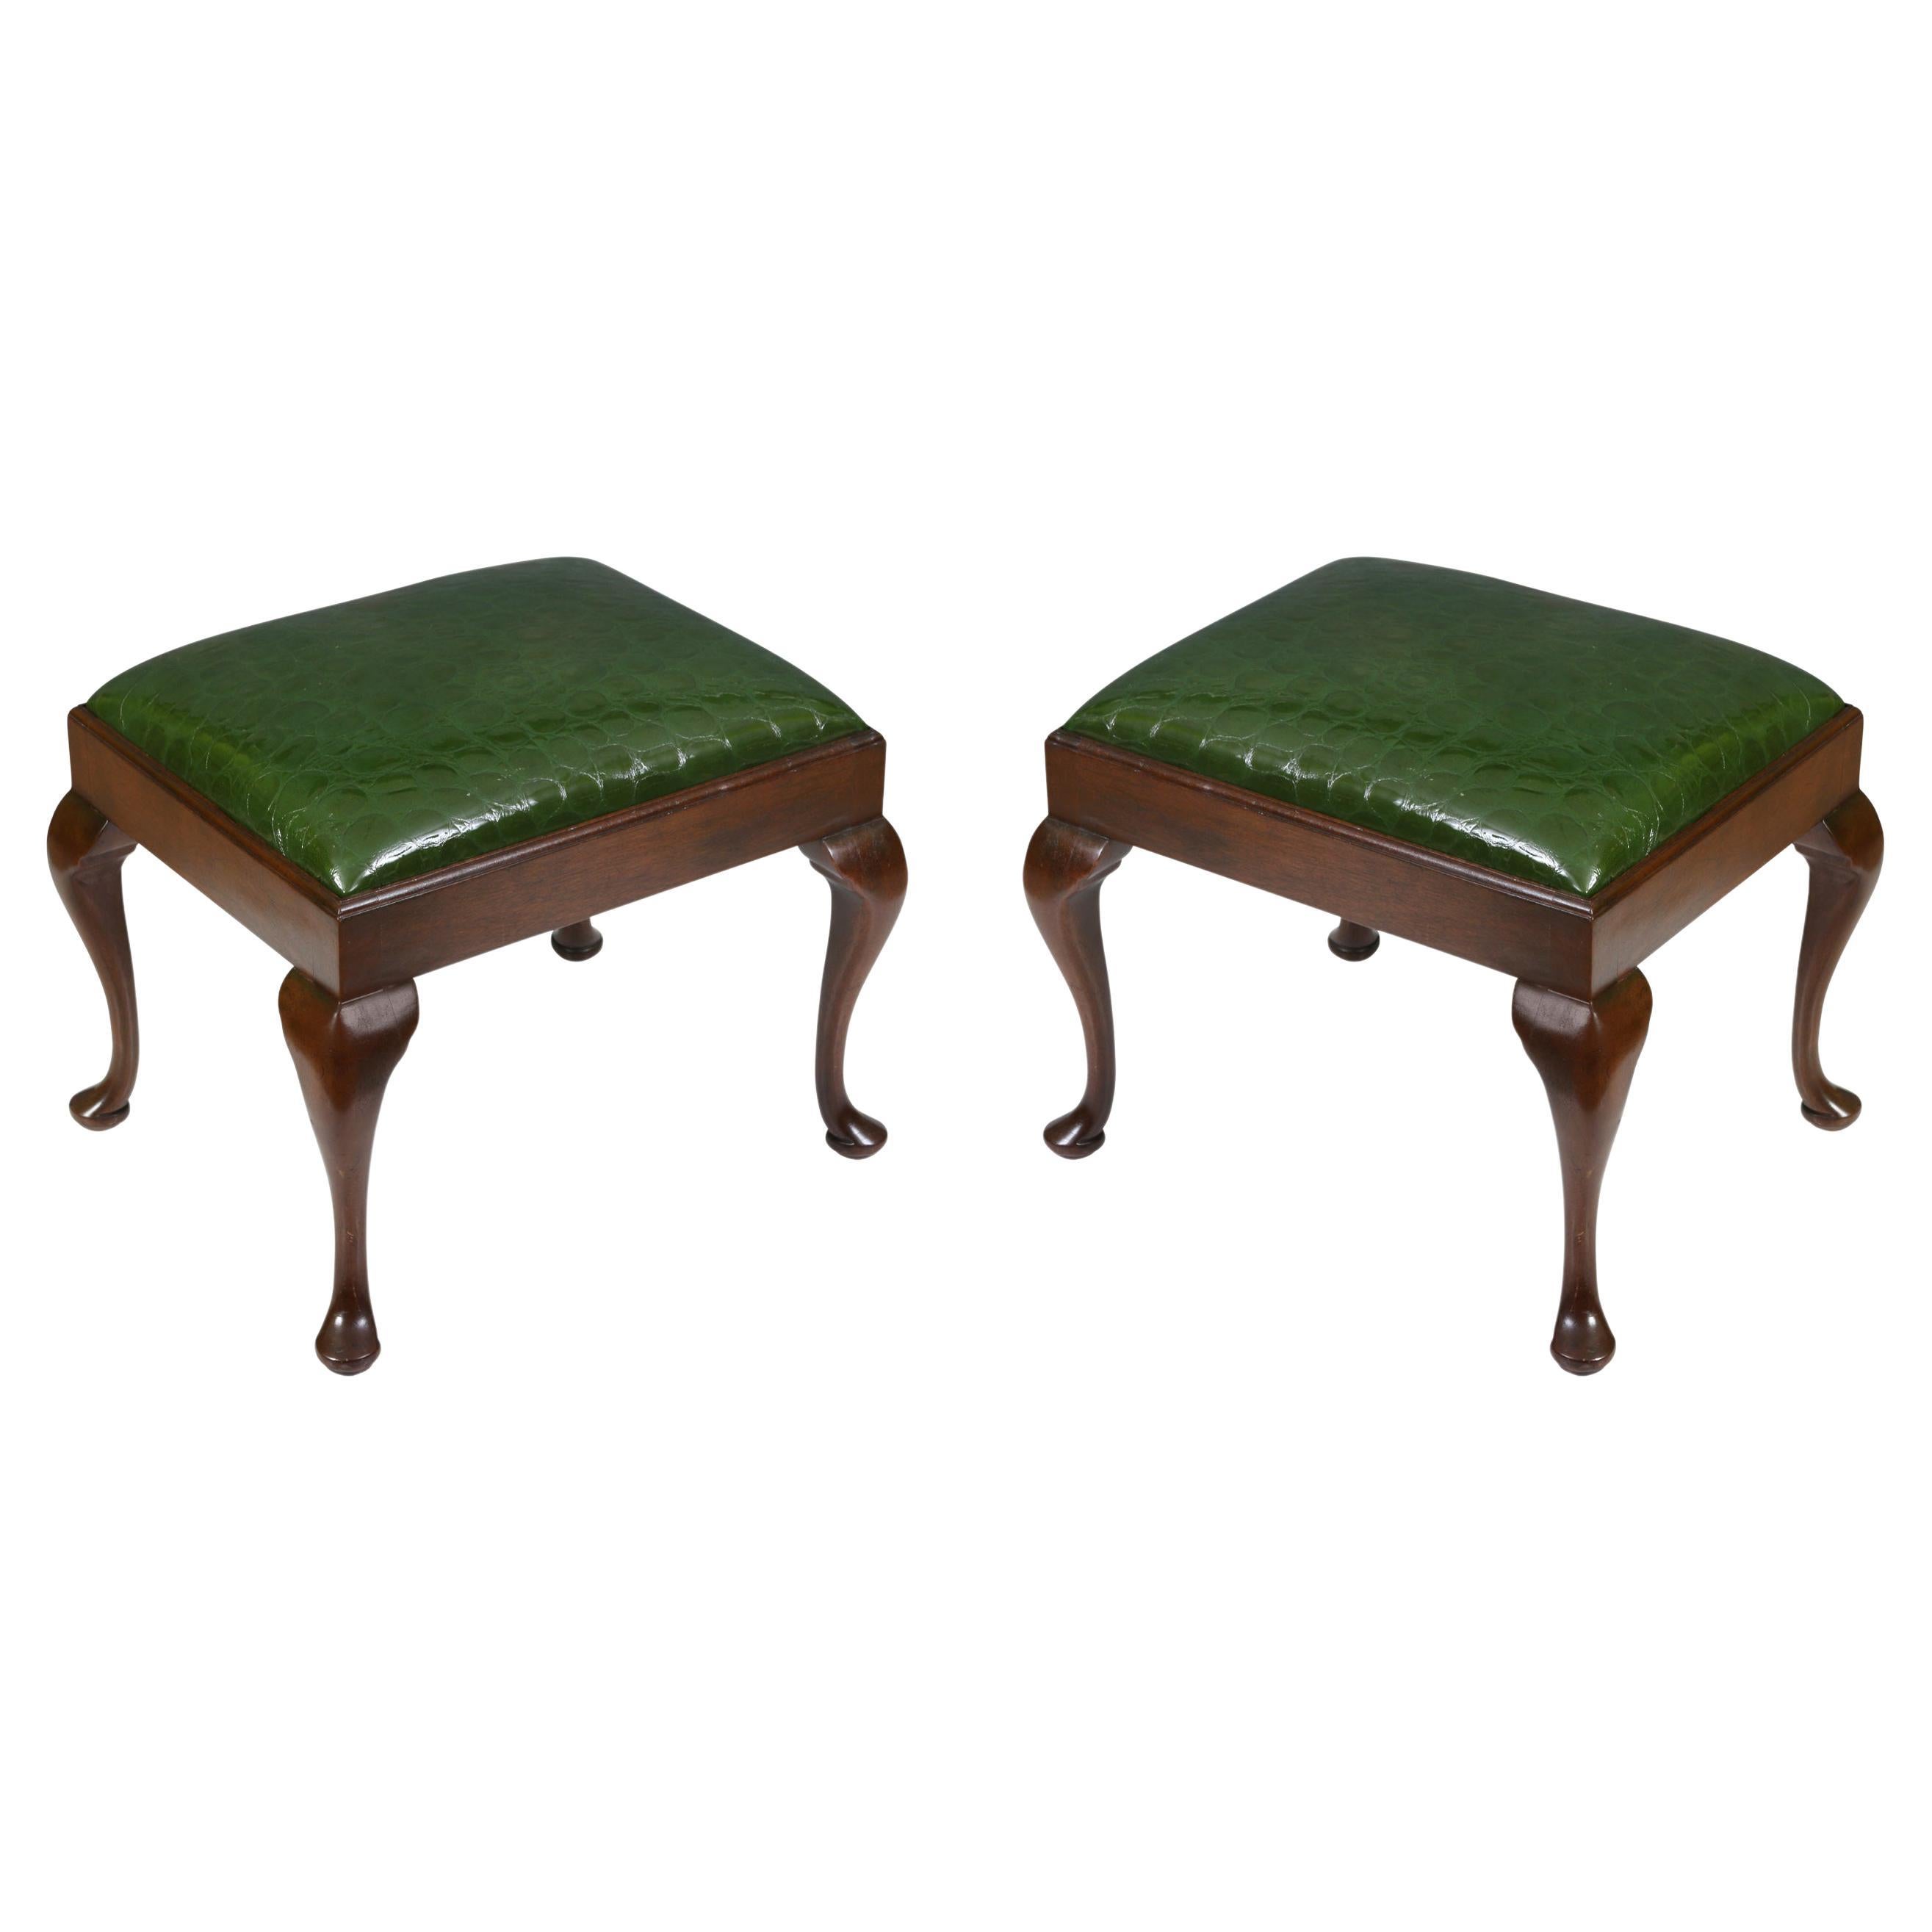 A Pair of Queen Anne Style Walnut Benches